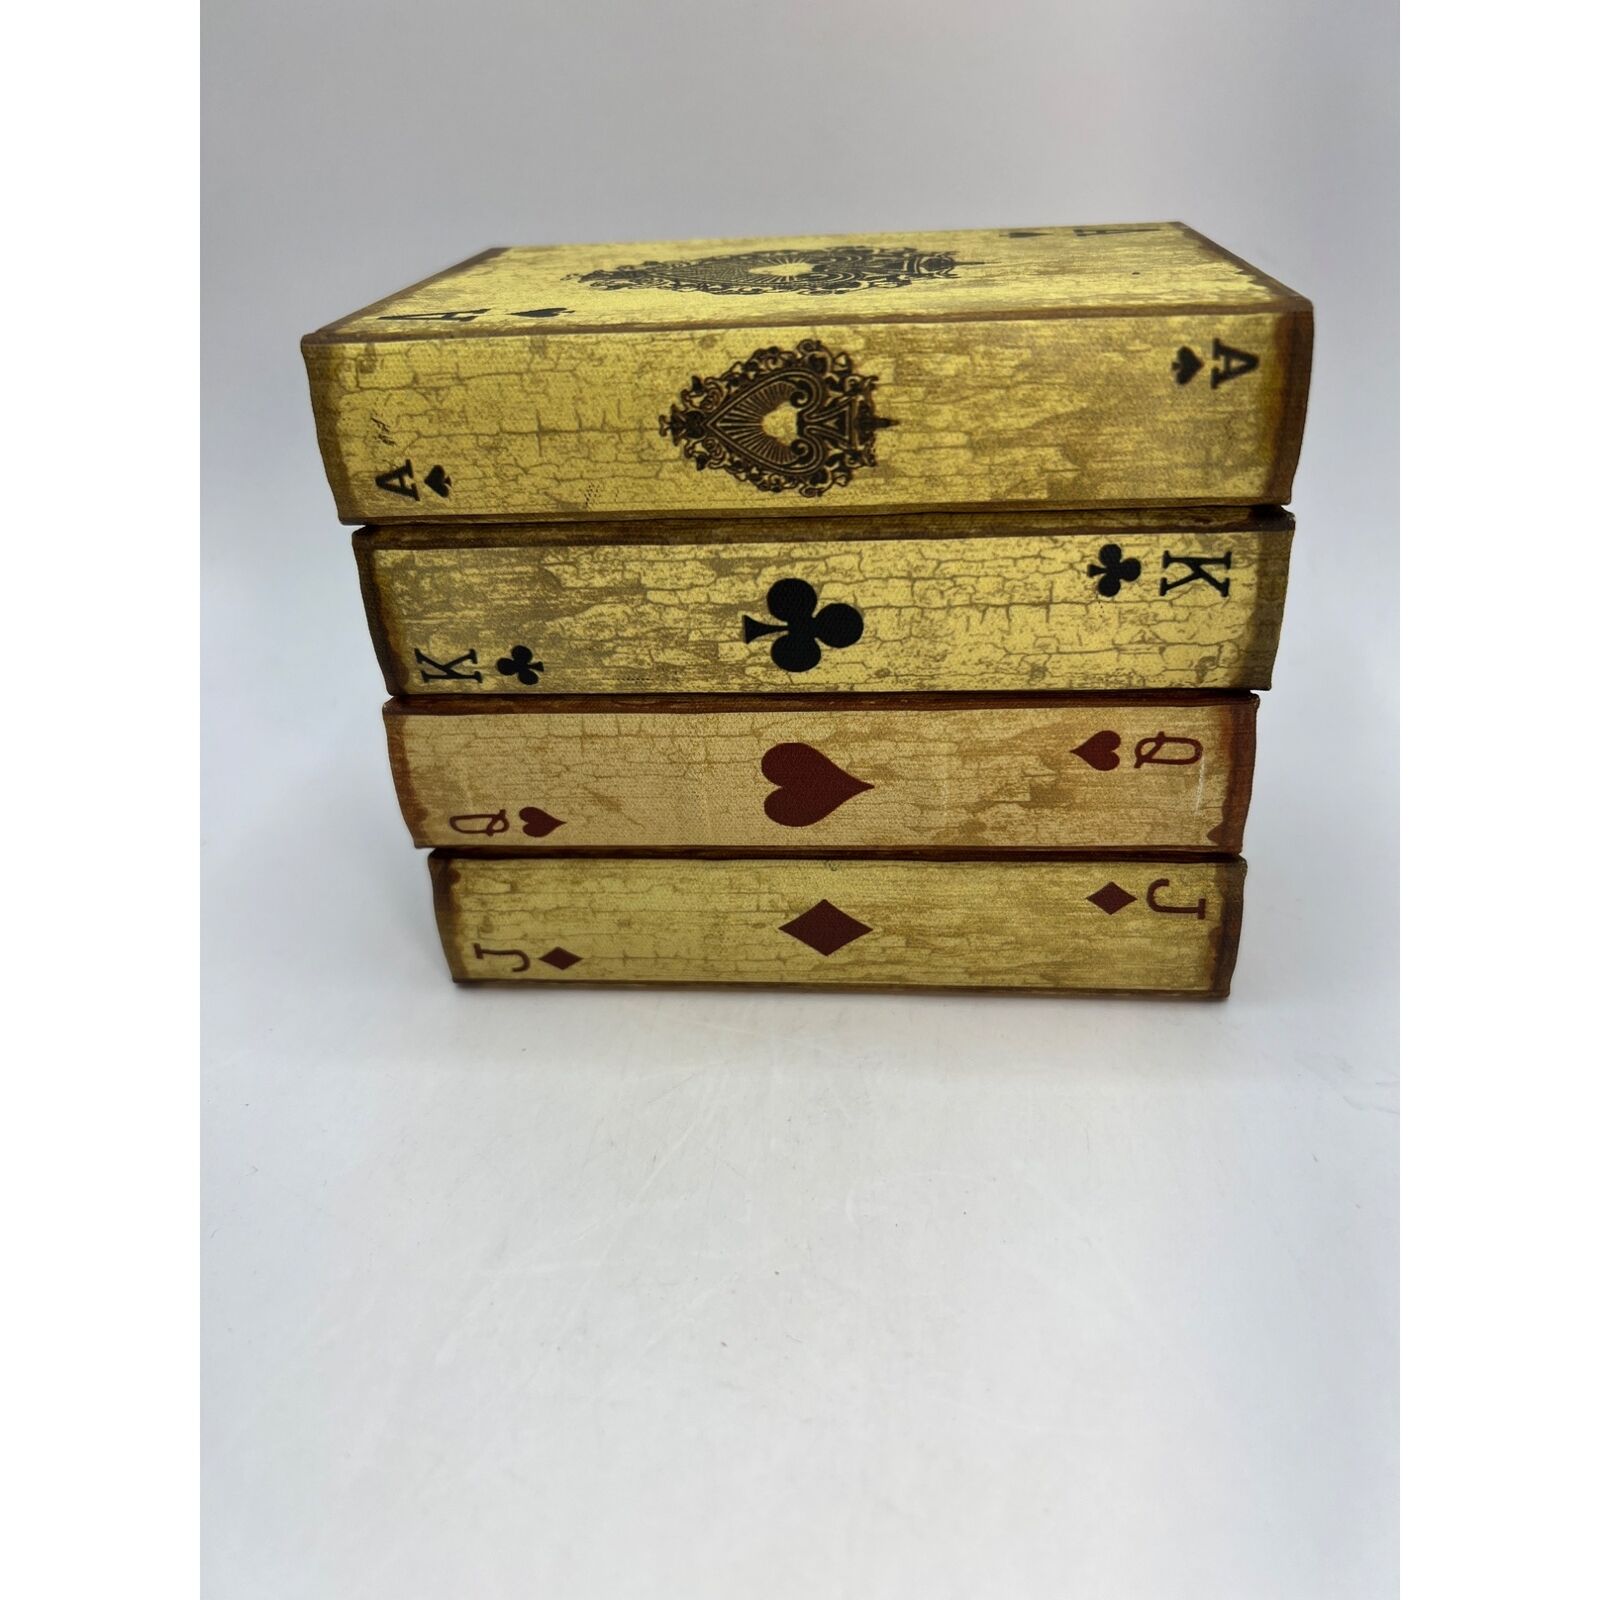 4 Ace Playing Cards Book Boxes Indoor Red, Tan, Black